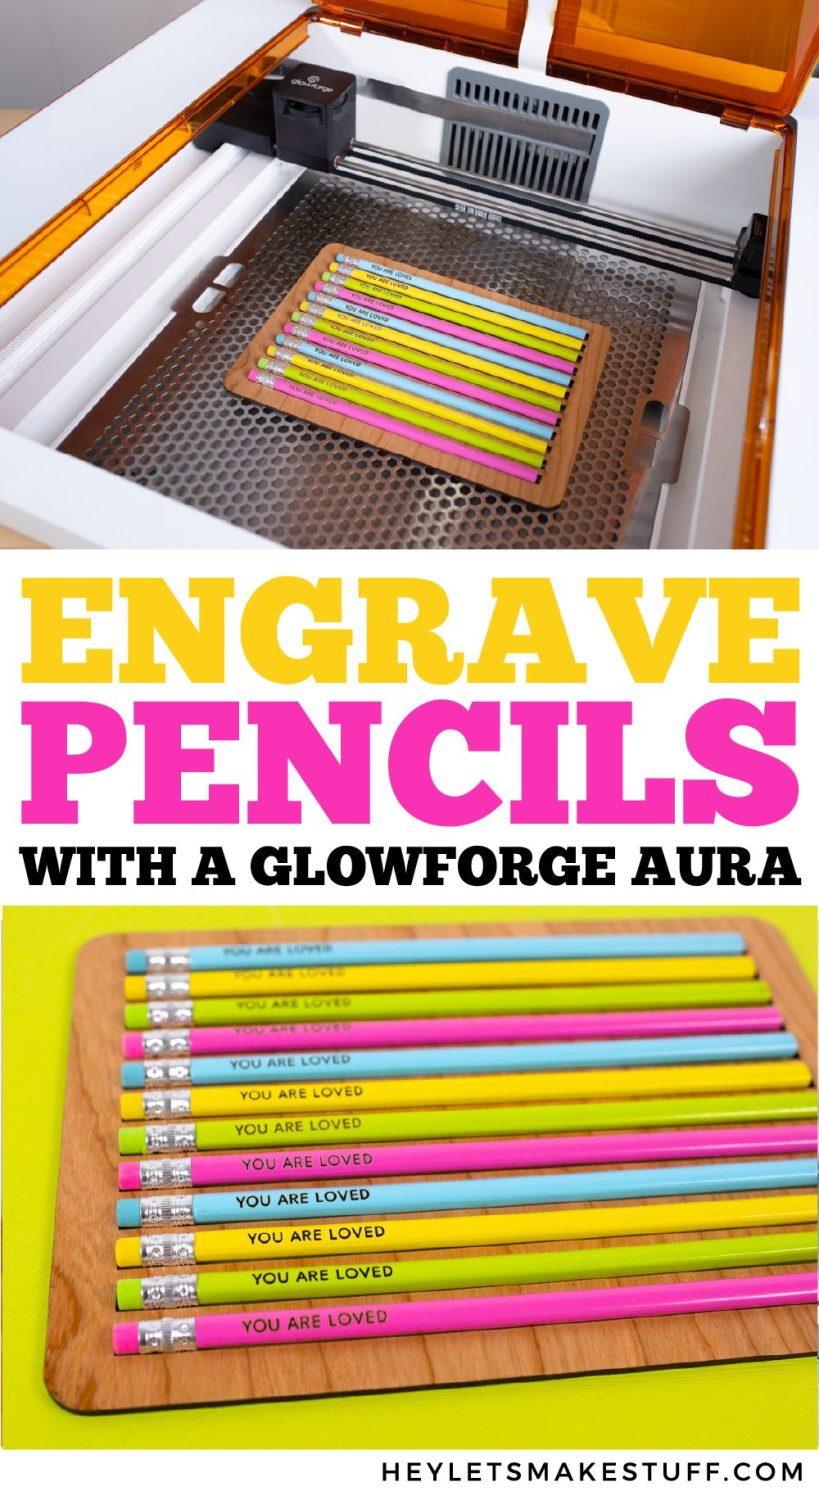 How to Engrave Pencils with a Glowforge Aura pin image 2